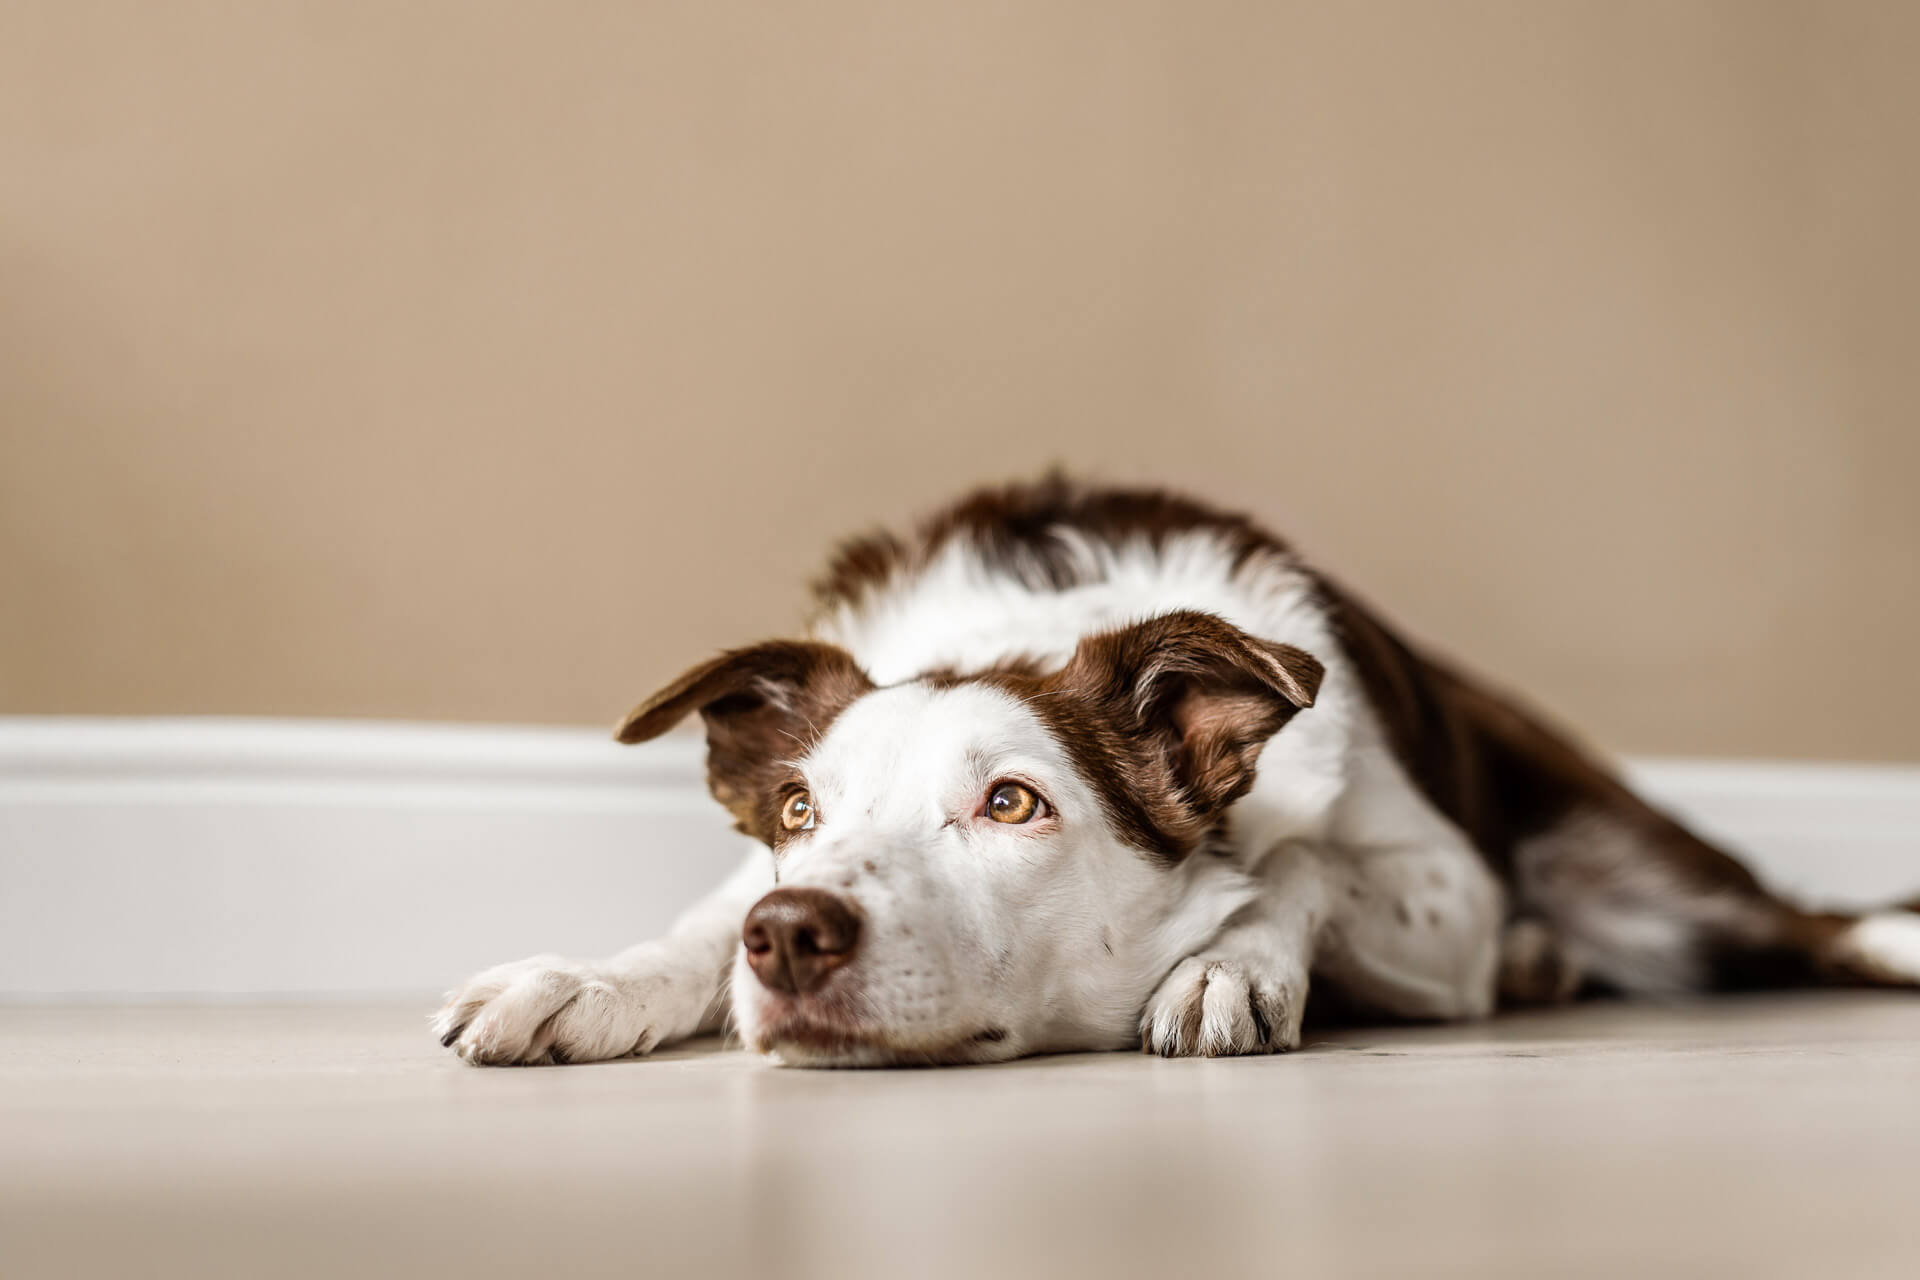 How long is it OK to leave a dog alone?